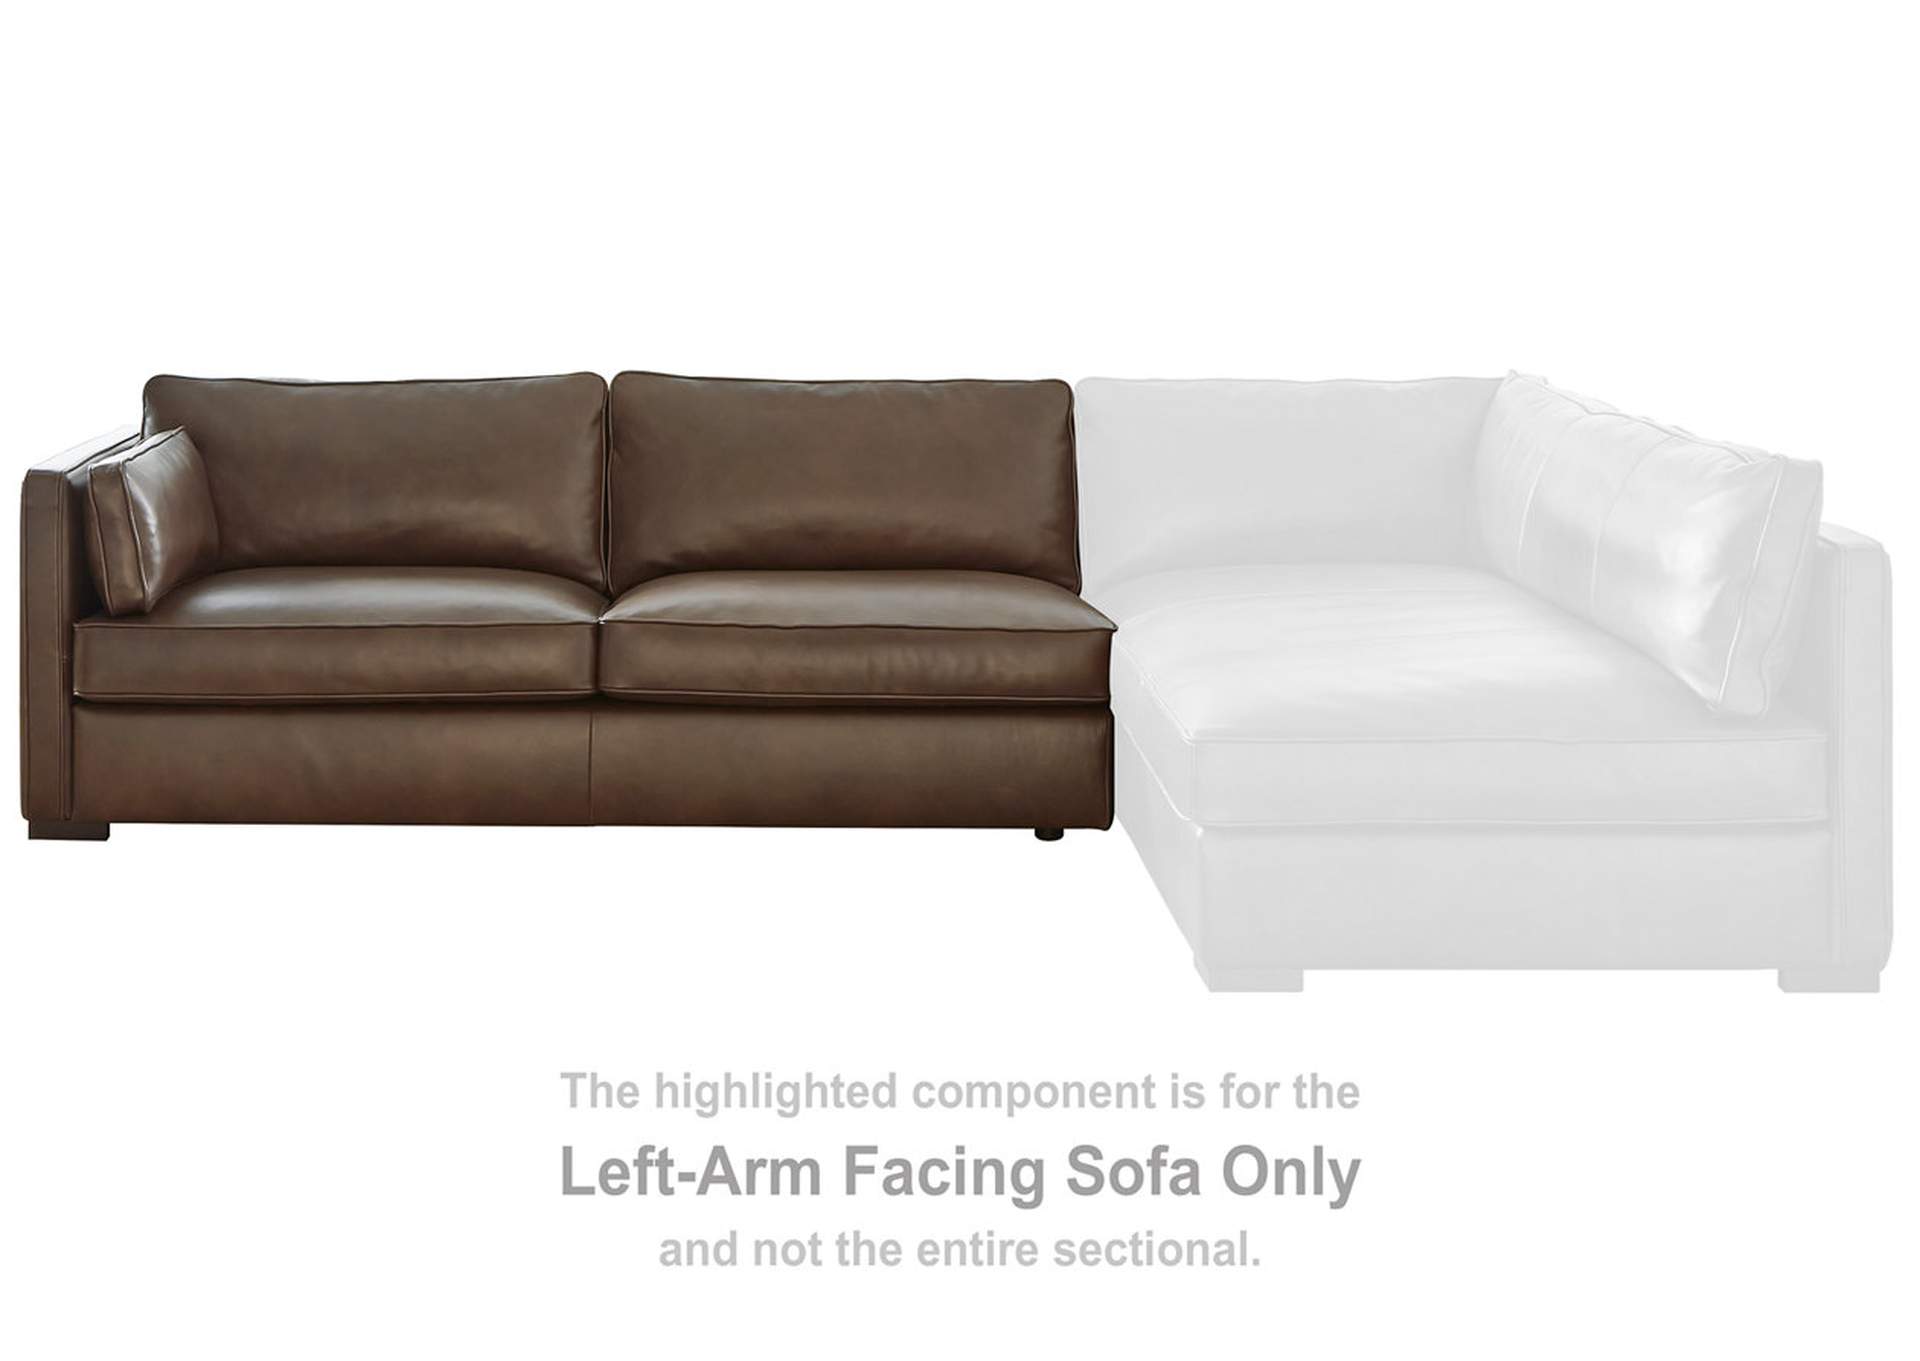 Kiessel 2-Piece Sectional,Signature Design By Ashley